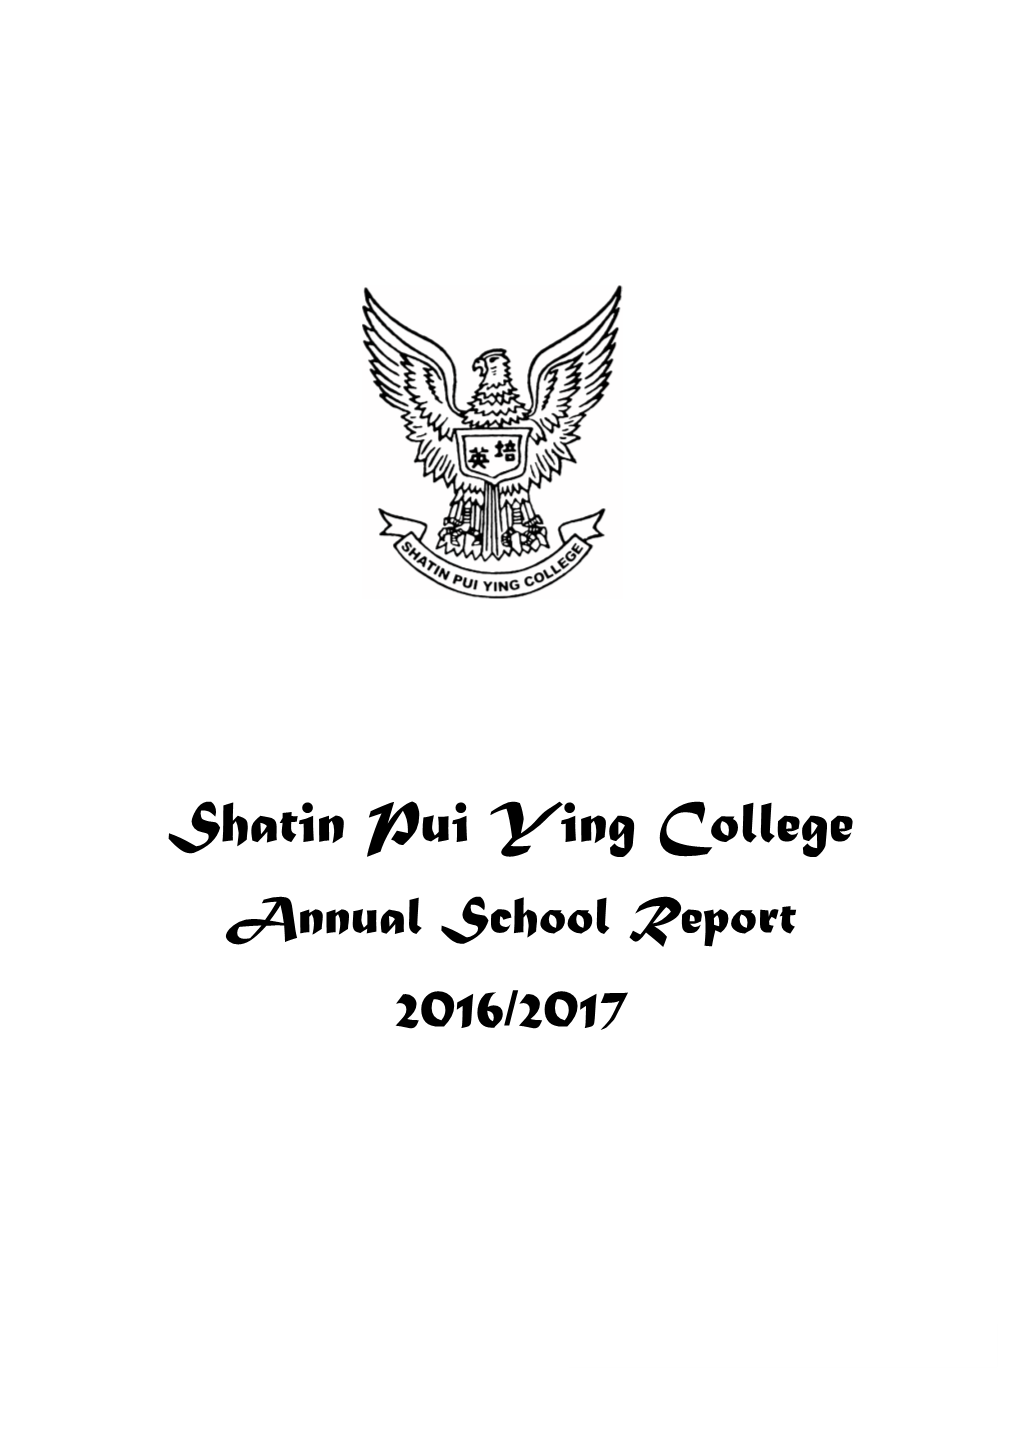 Shatin Pui Ying College Annual School Report 2016/2017